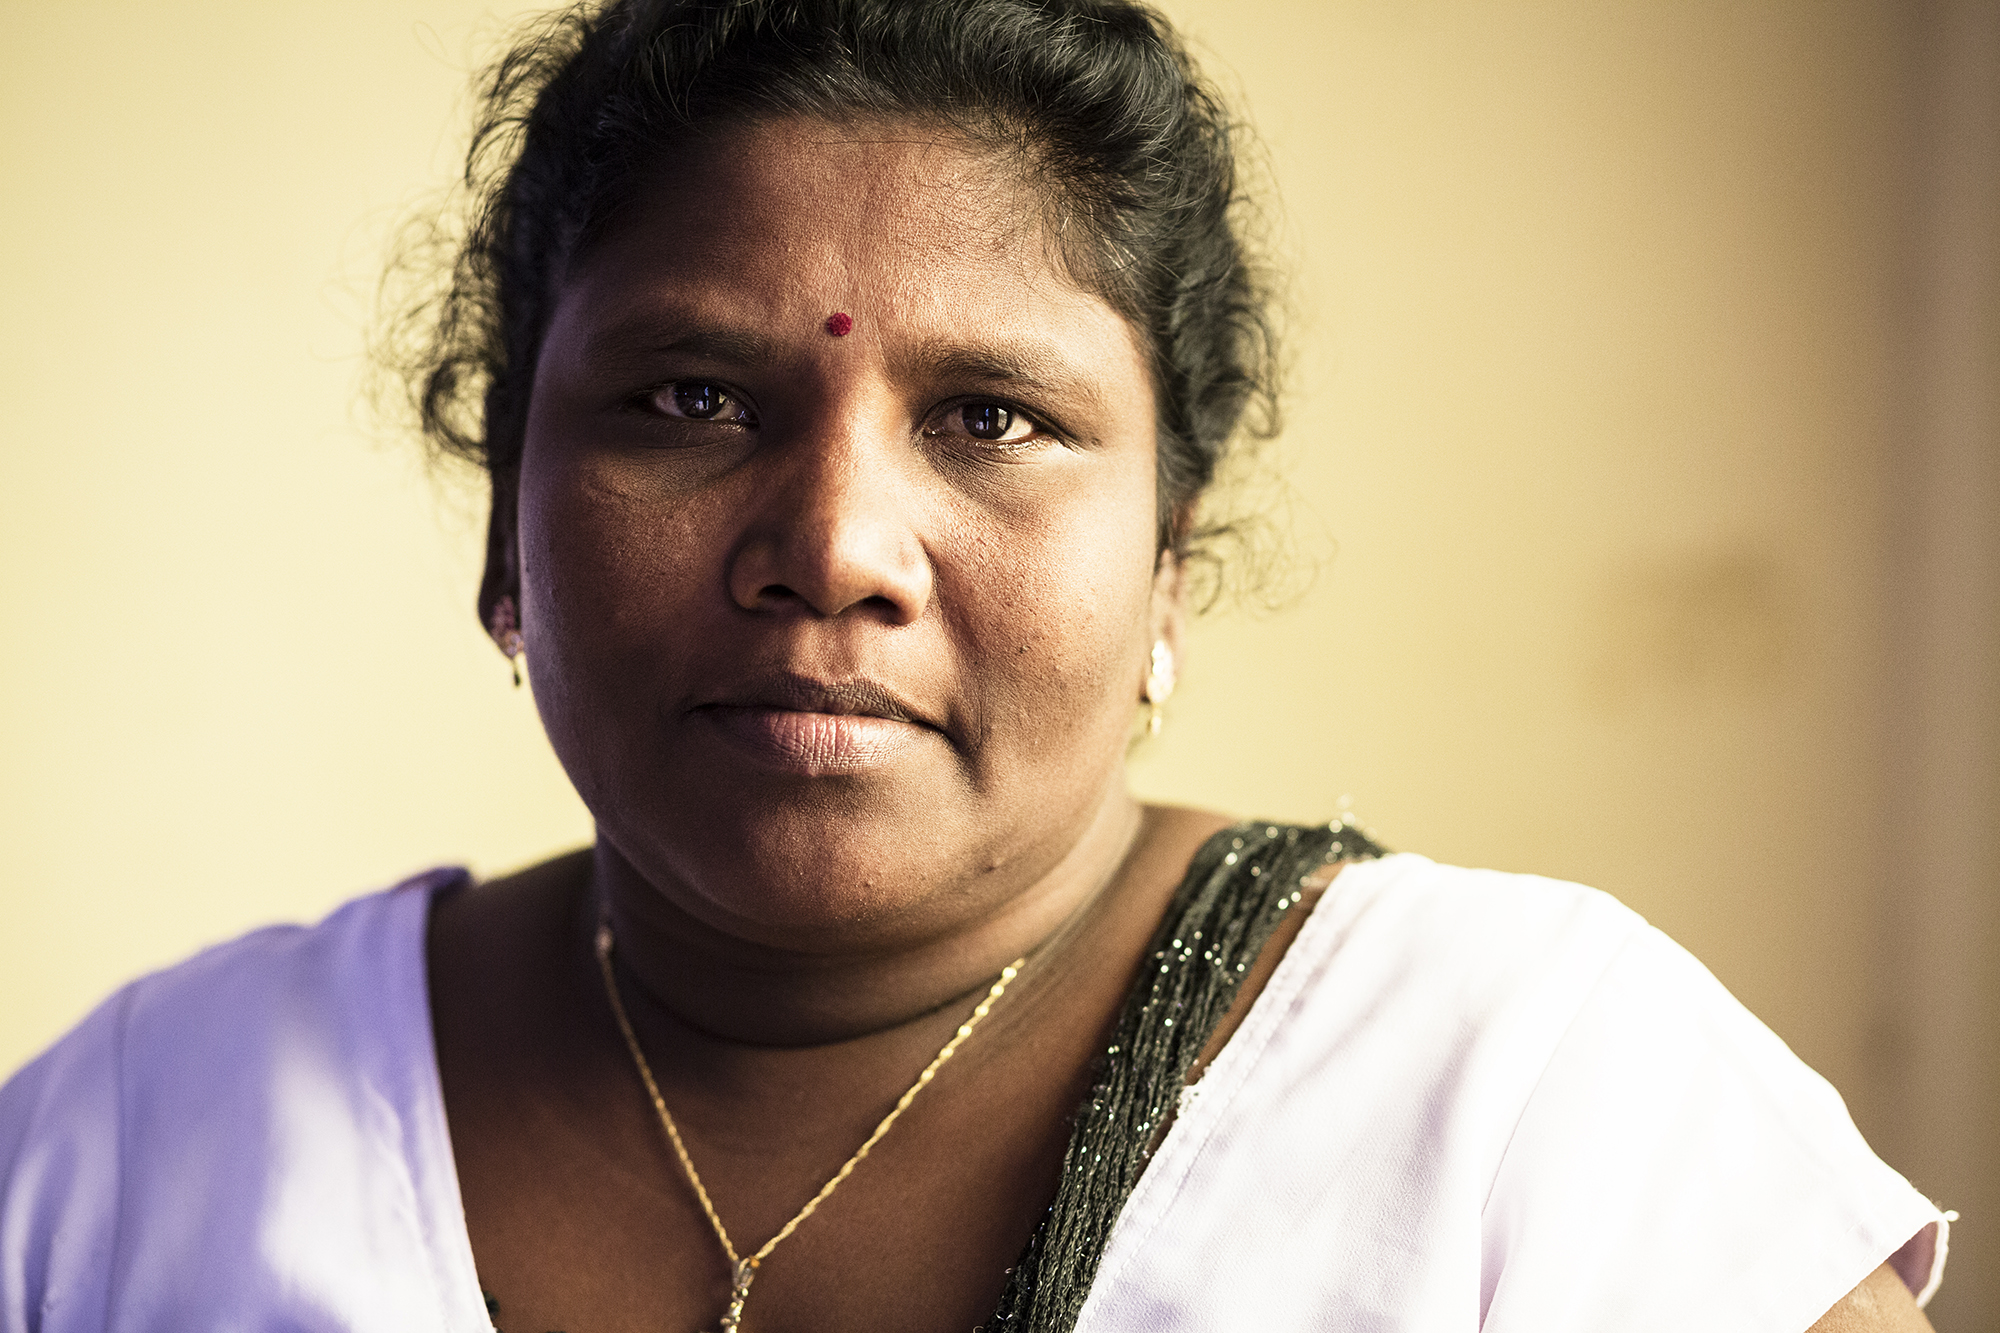  Mariaselvi, 42. Mariaselvi's two brothers were allegedly detained by the Sri Lankan army in 1995 and 1998. She has not seen either of them since. She keeps her brother Robert's passport with her, in case he is found.  "He had just gotten himself one